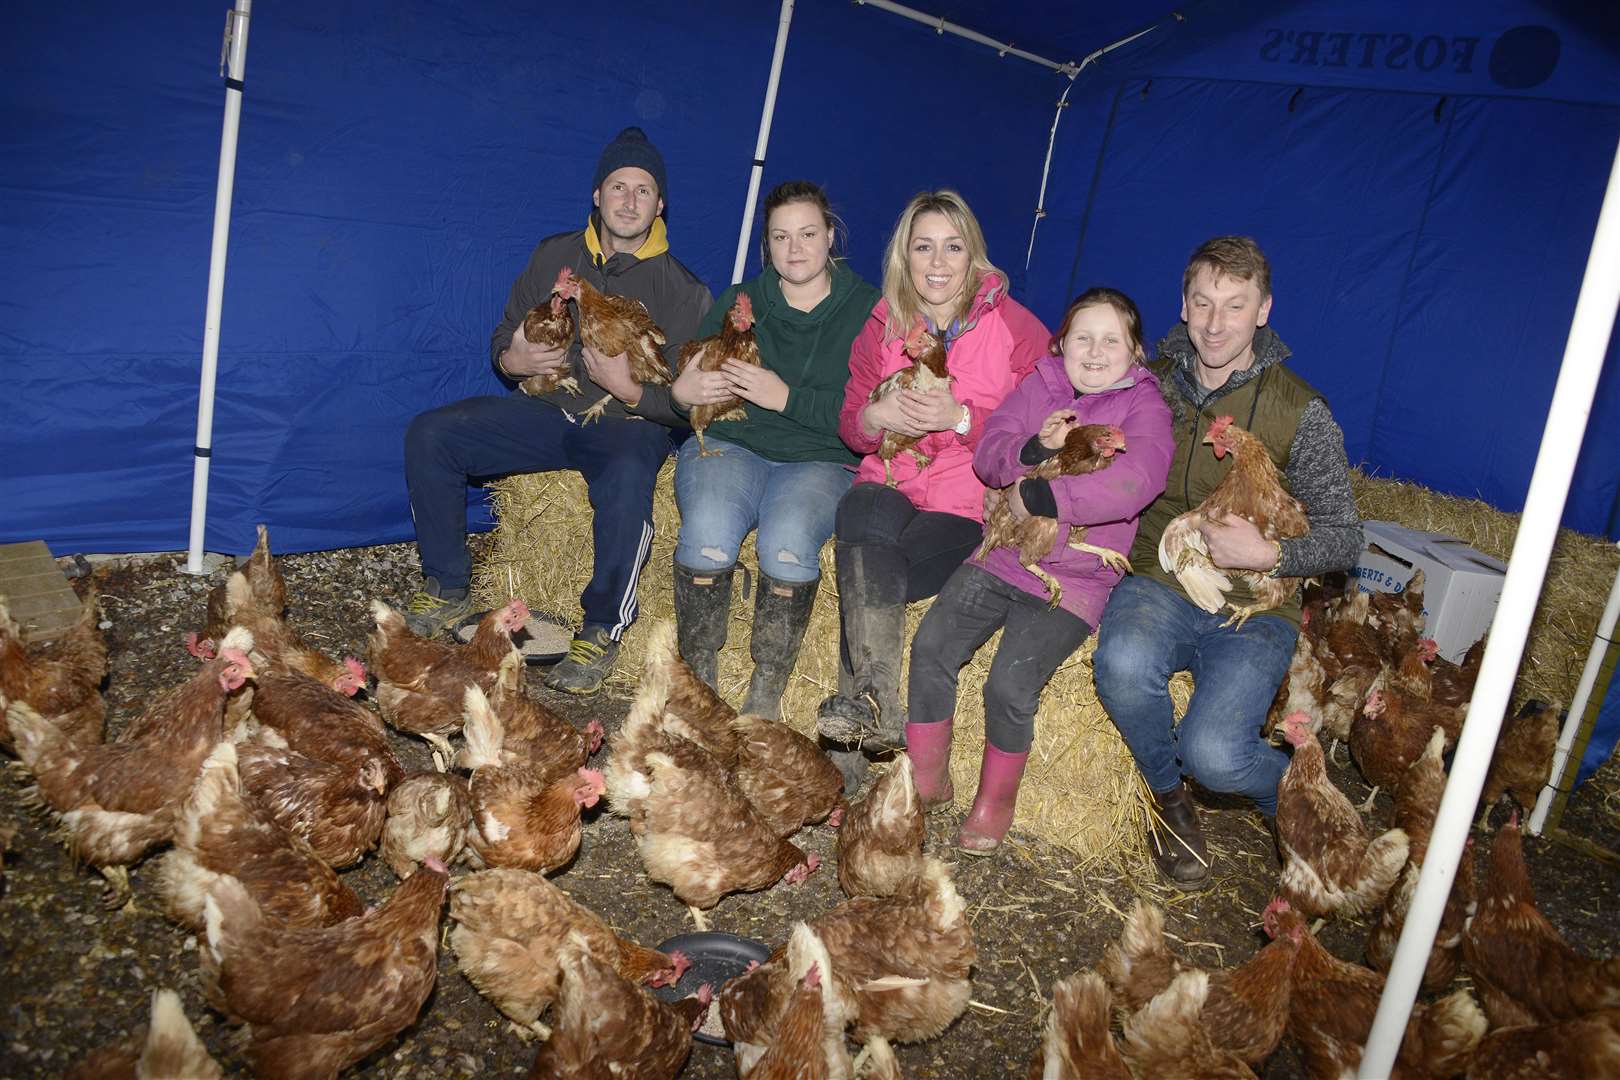 From left, James Green, Chlole Turner, Gillian Savage, Alice Hamilton and John Laws with the hens to be rehomed. Picture: Paul Amos